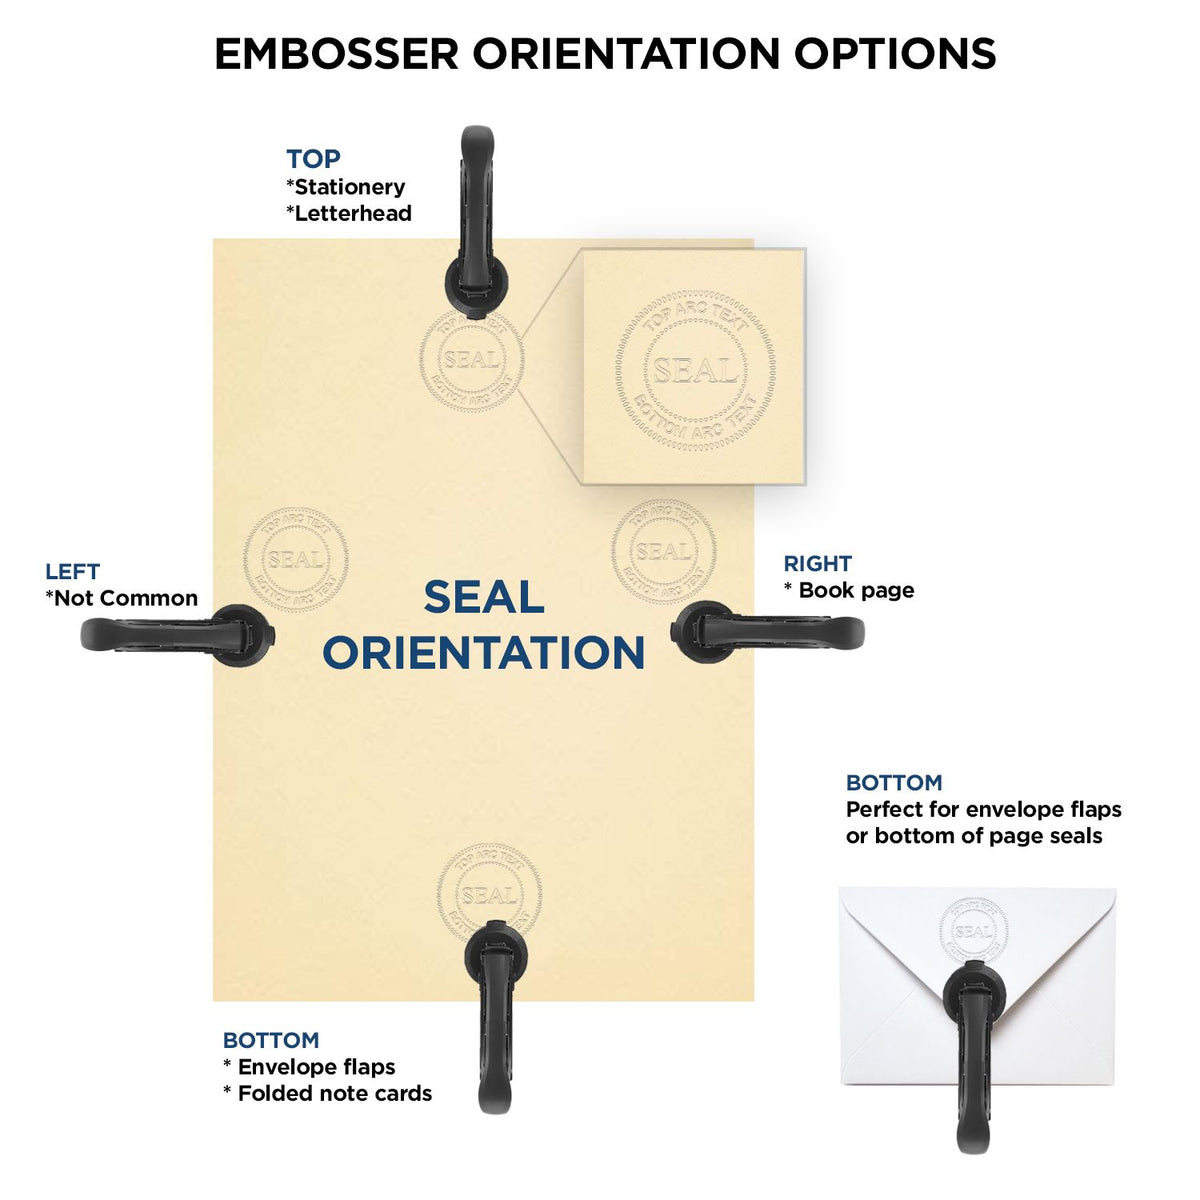 An infographic for the Soft Pocket Delaware Landscape Architect Embosser showing embosser orientation, this is showing examples of a top, bottom, right and left insert.